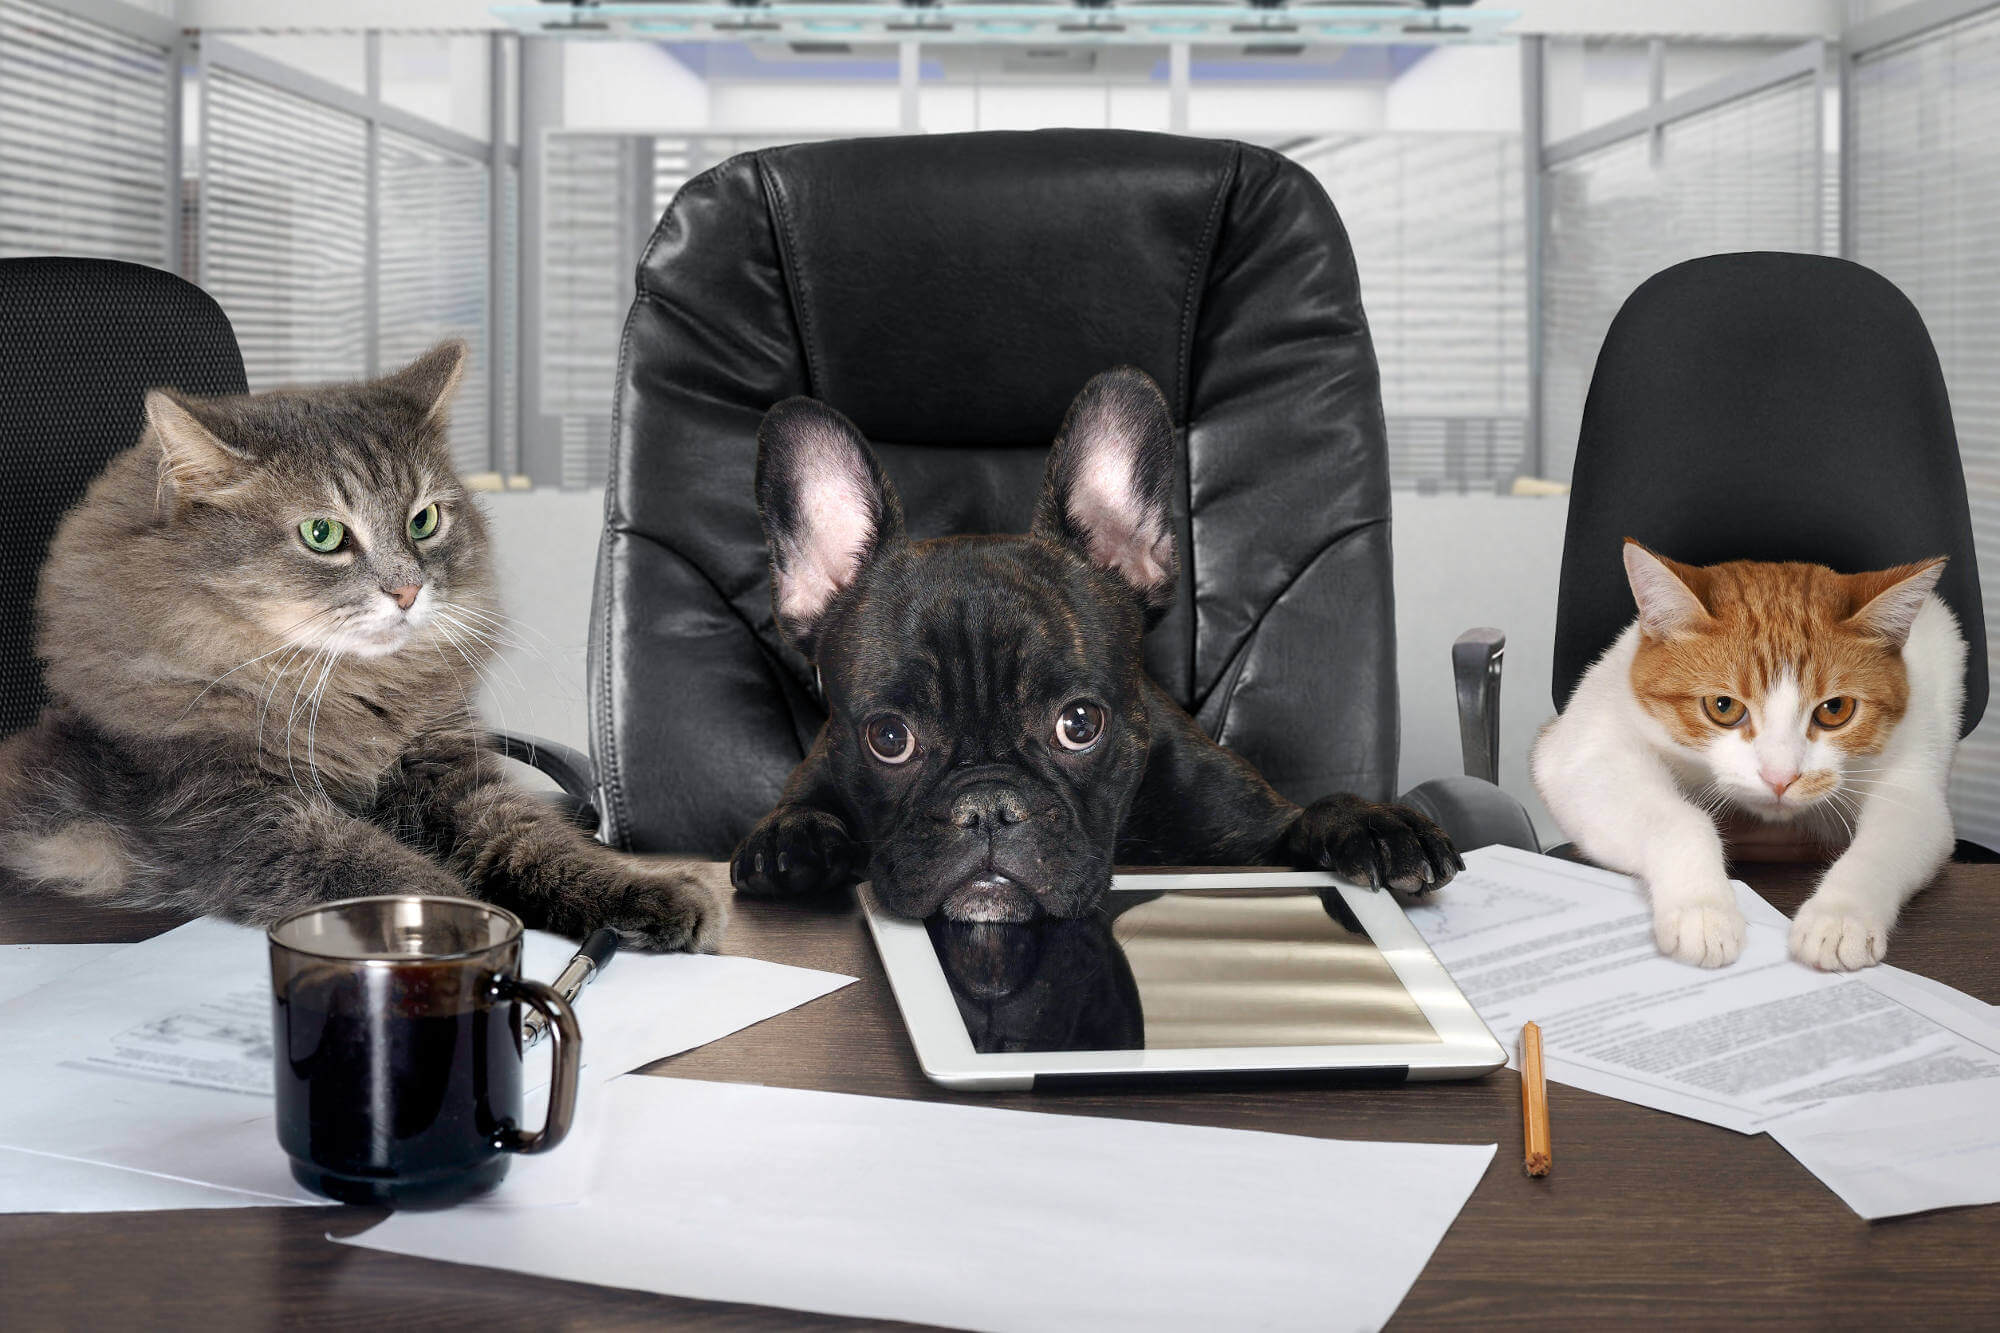 Dog and two cats sitting in chairs at a business desk